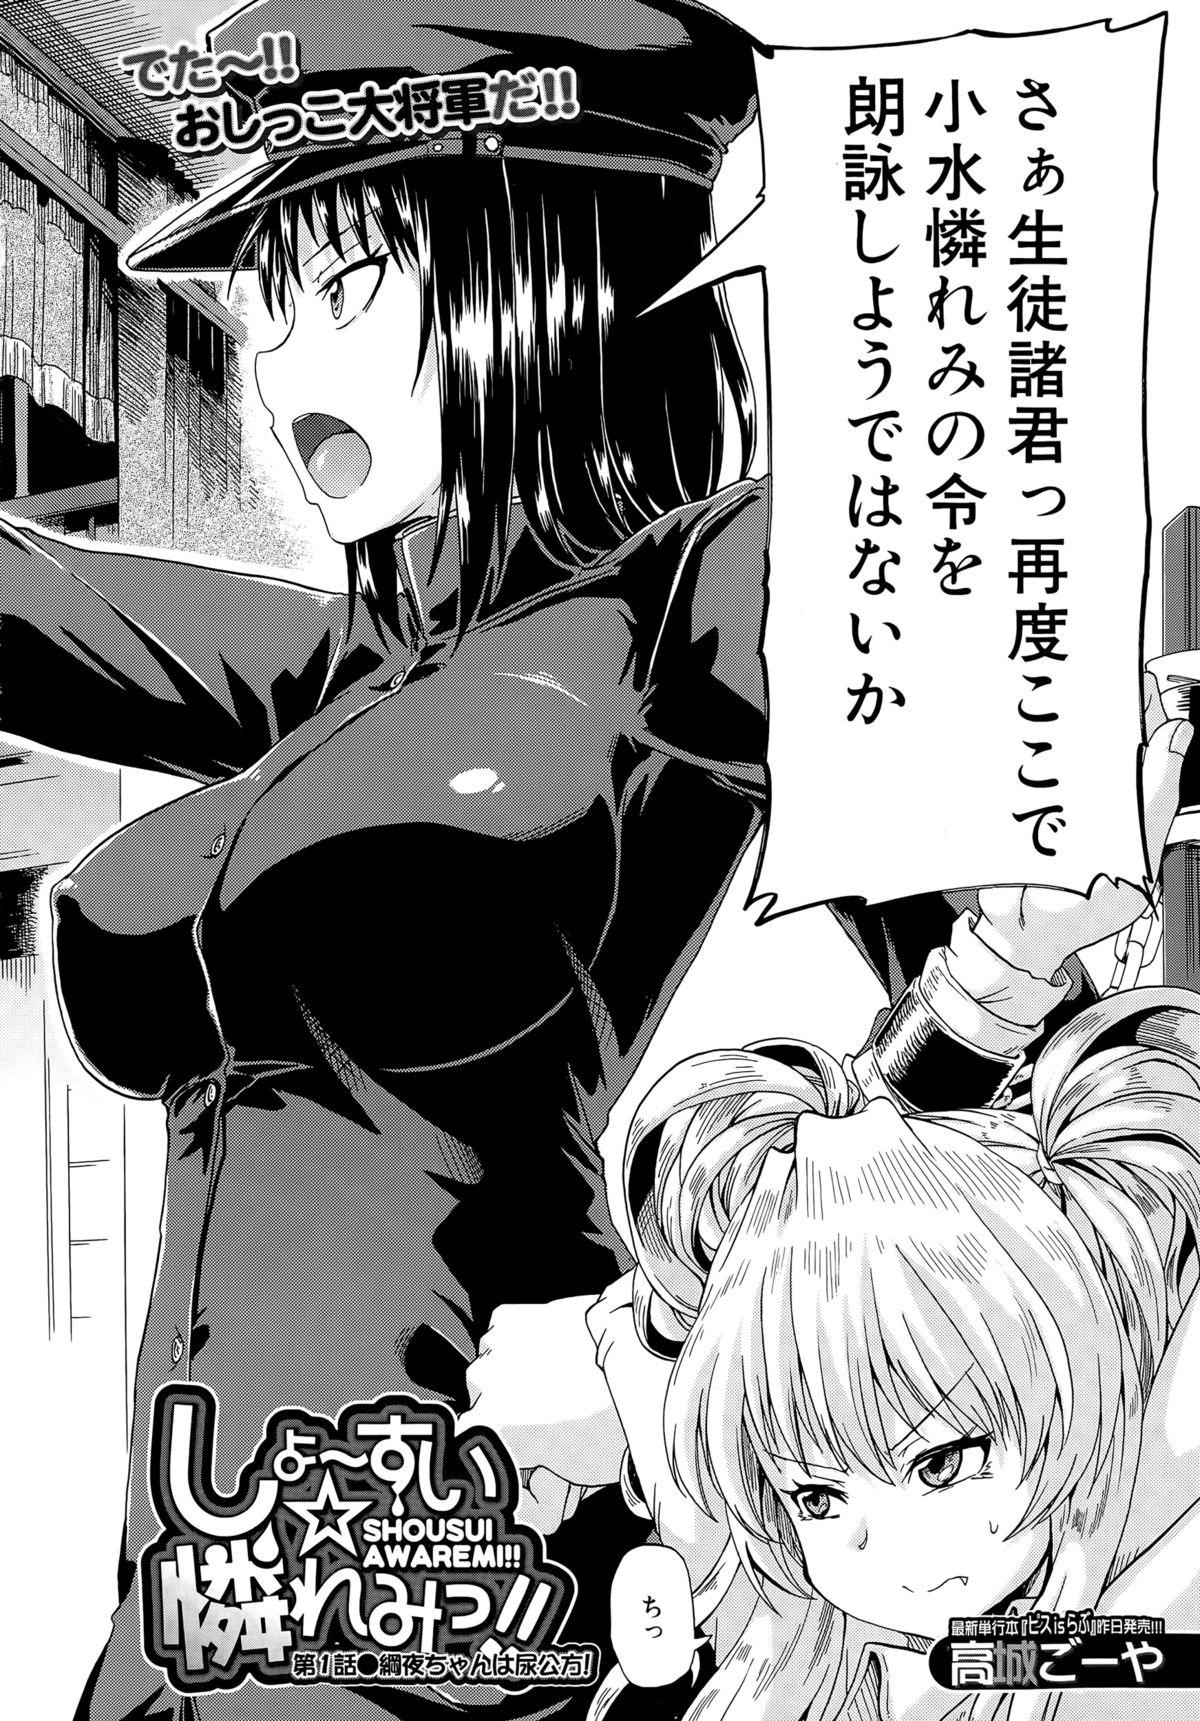 Glasses Shousui Awaremi!! Ch. 1-3 Natural Boobs - Page 6